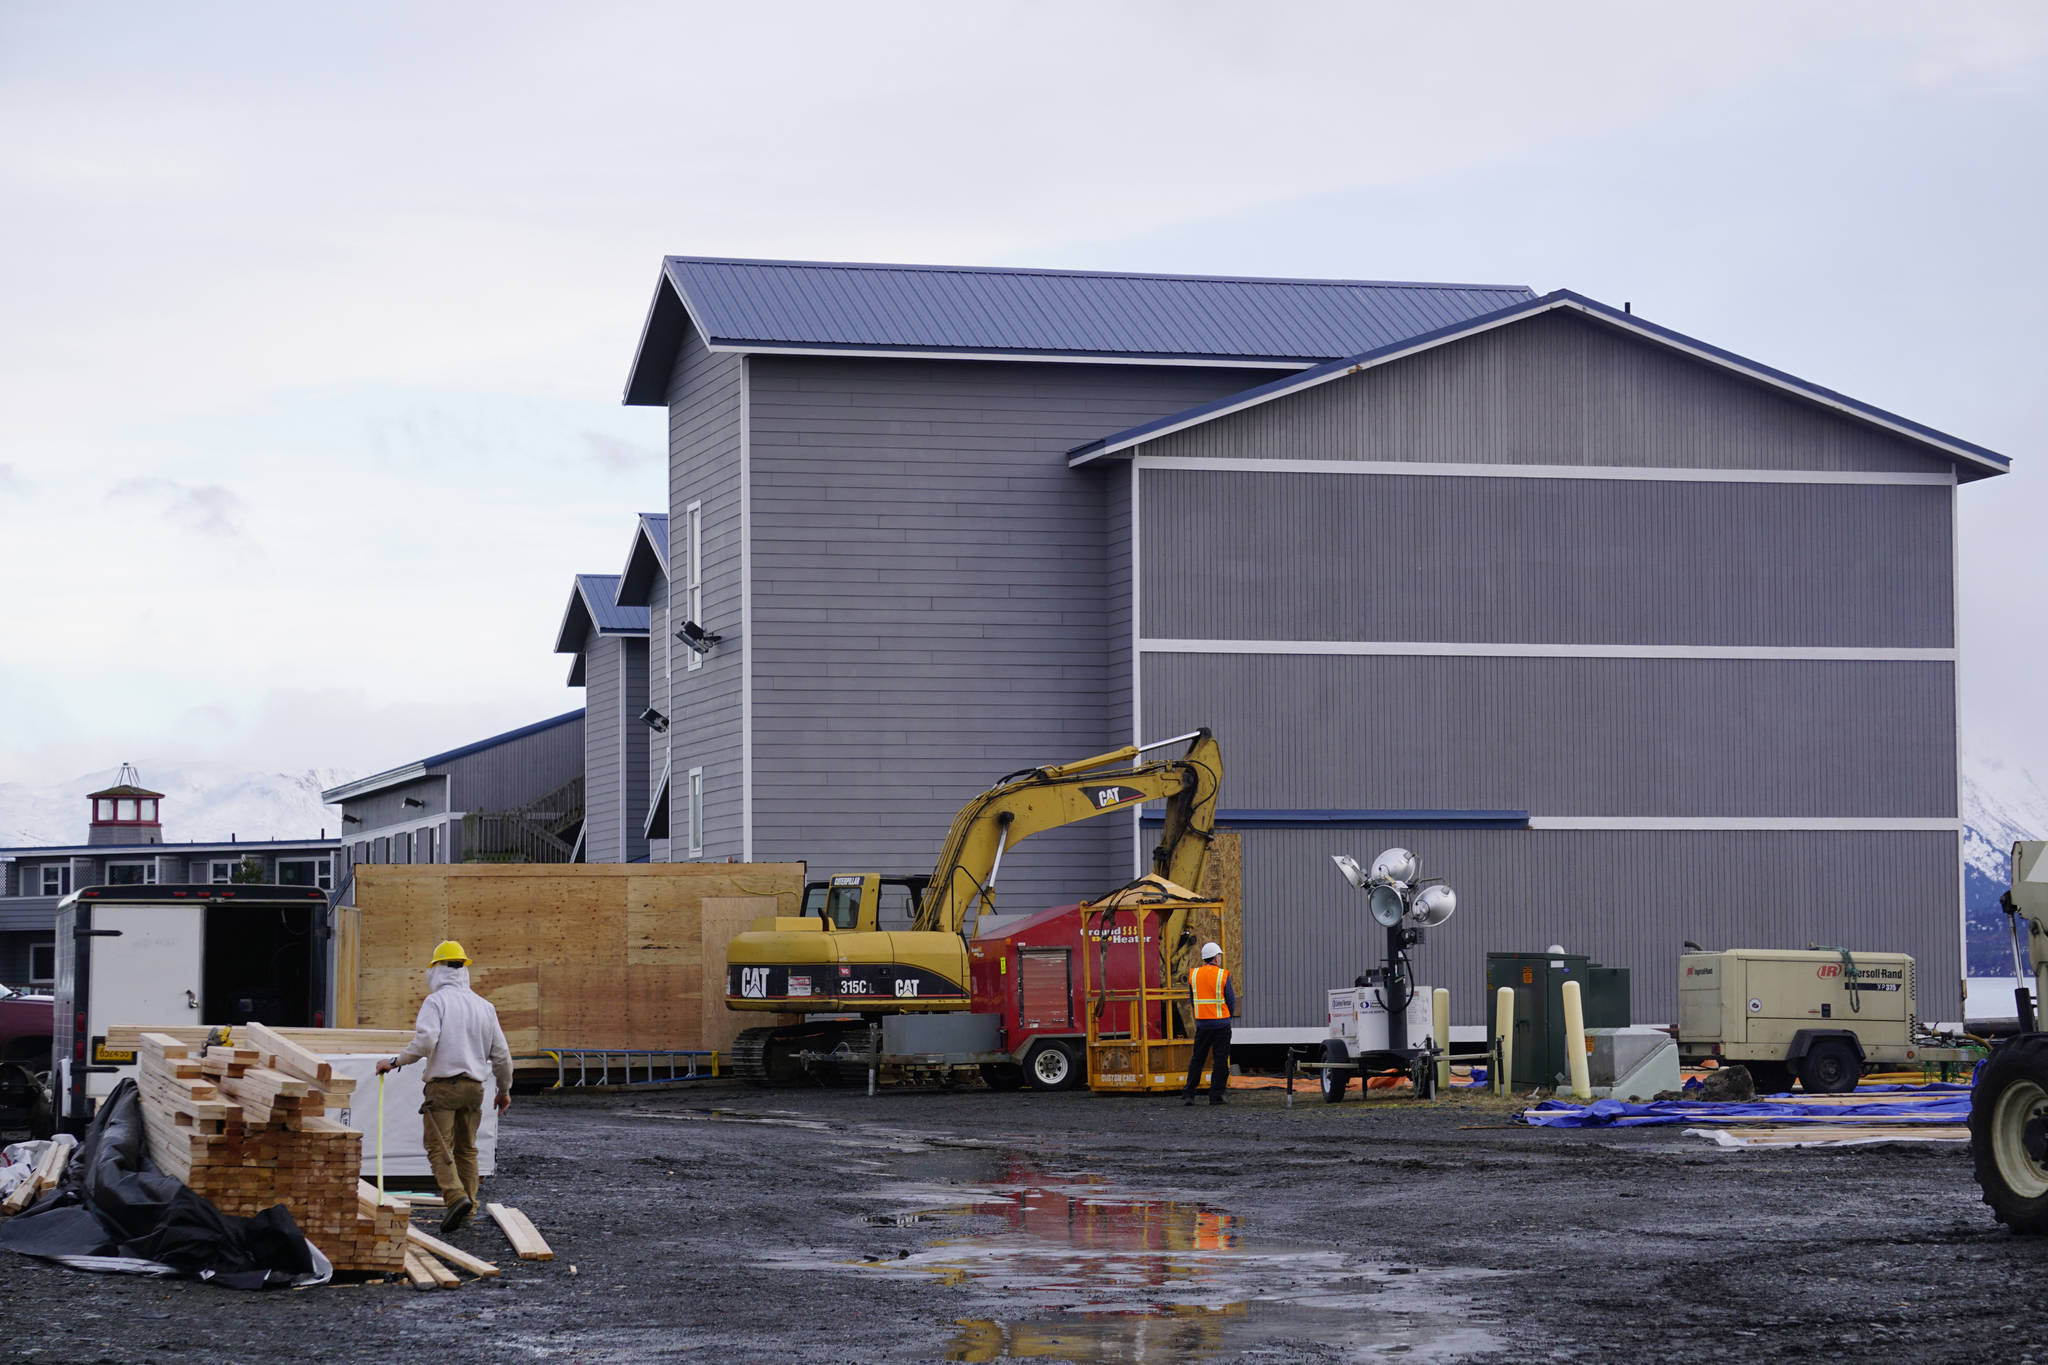 Carpenters with Steiner’s North Star Construction on Monday, Jan. 14, 2019 work on an addition at Land’s End Resort on the Homer Spit in Homer, Alaska. (Photo by Michael Armstrong/Homer News)